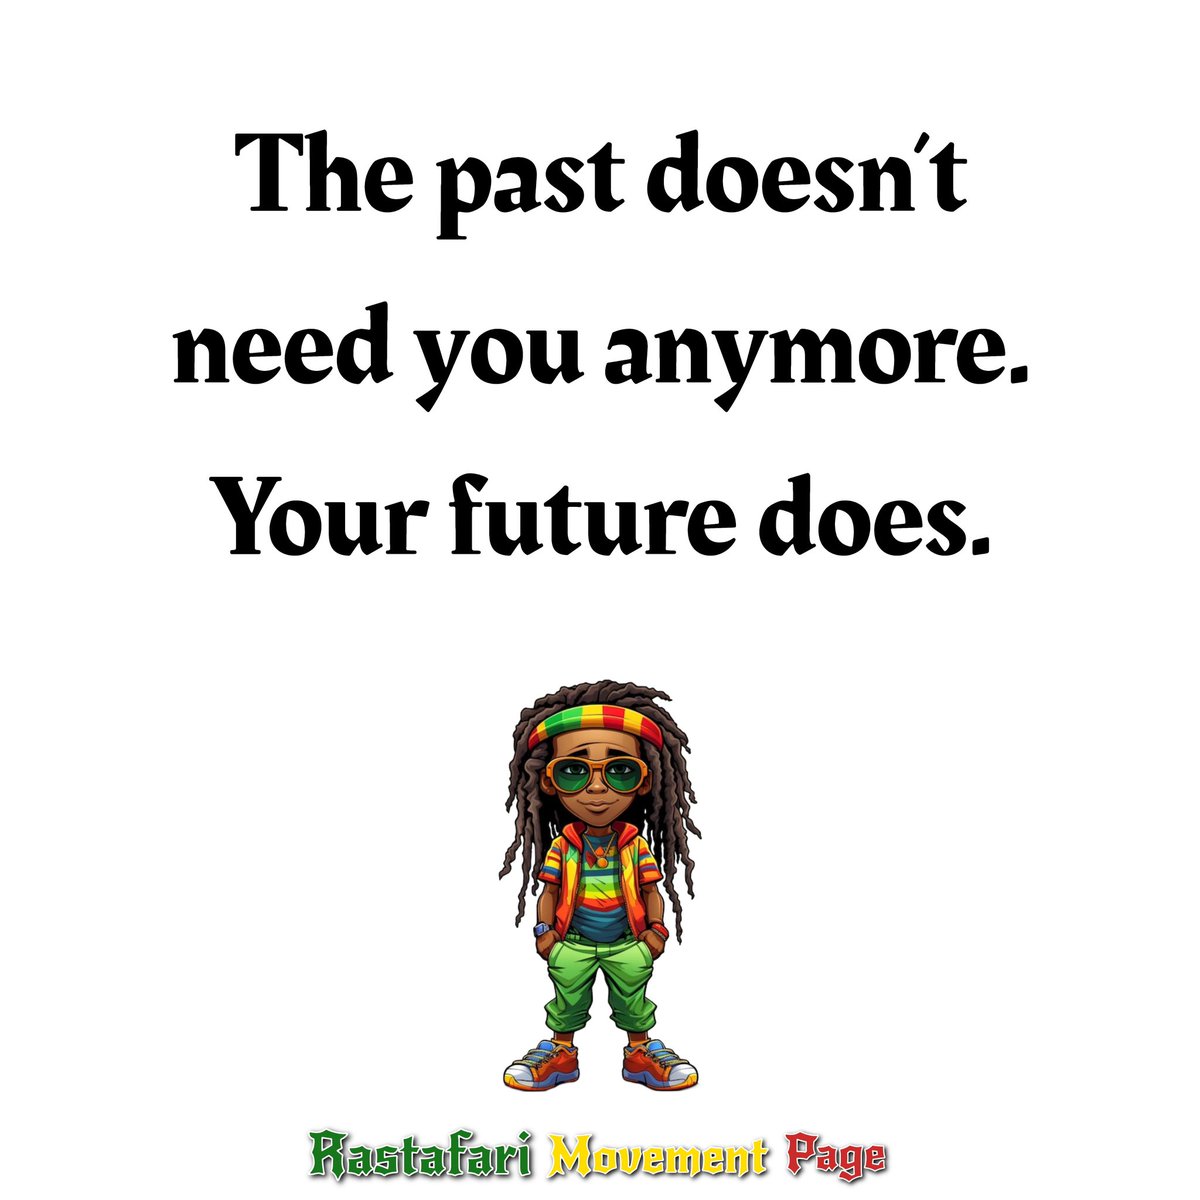 REMEMBER:

The past doesn’t need you anymore. Your future does.